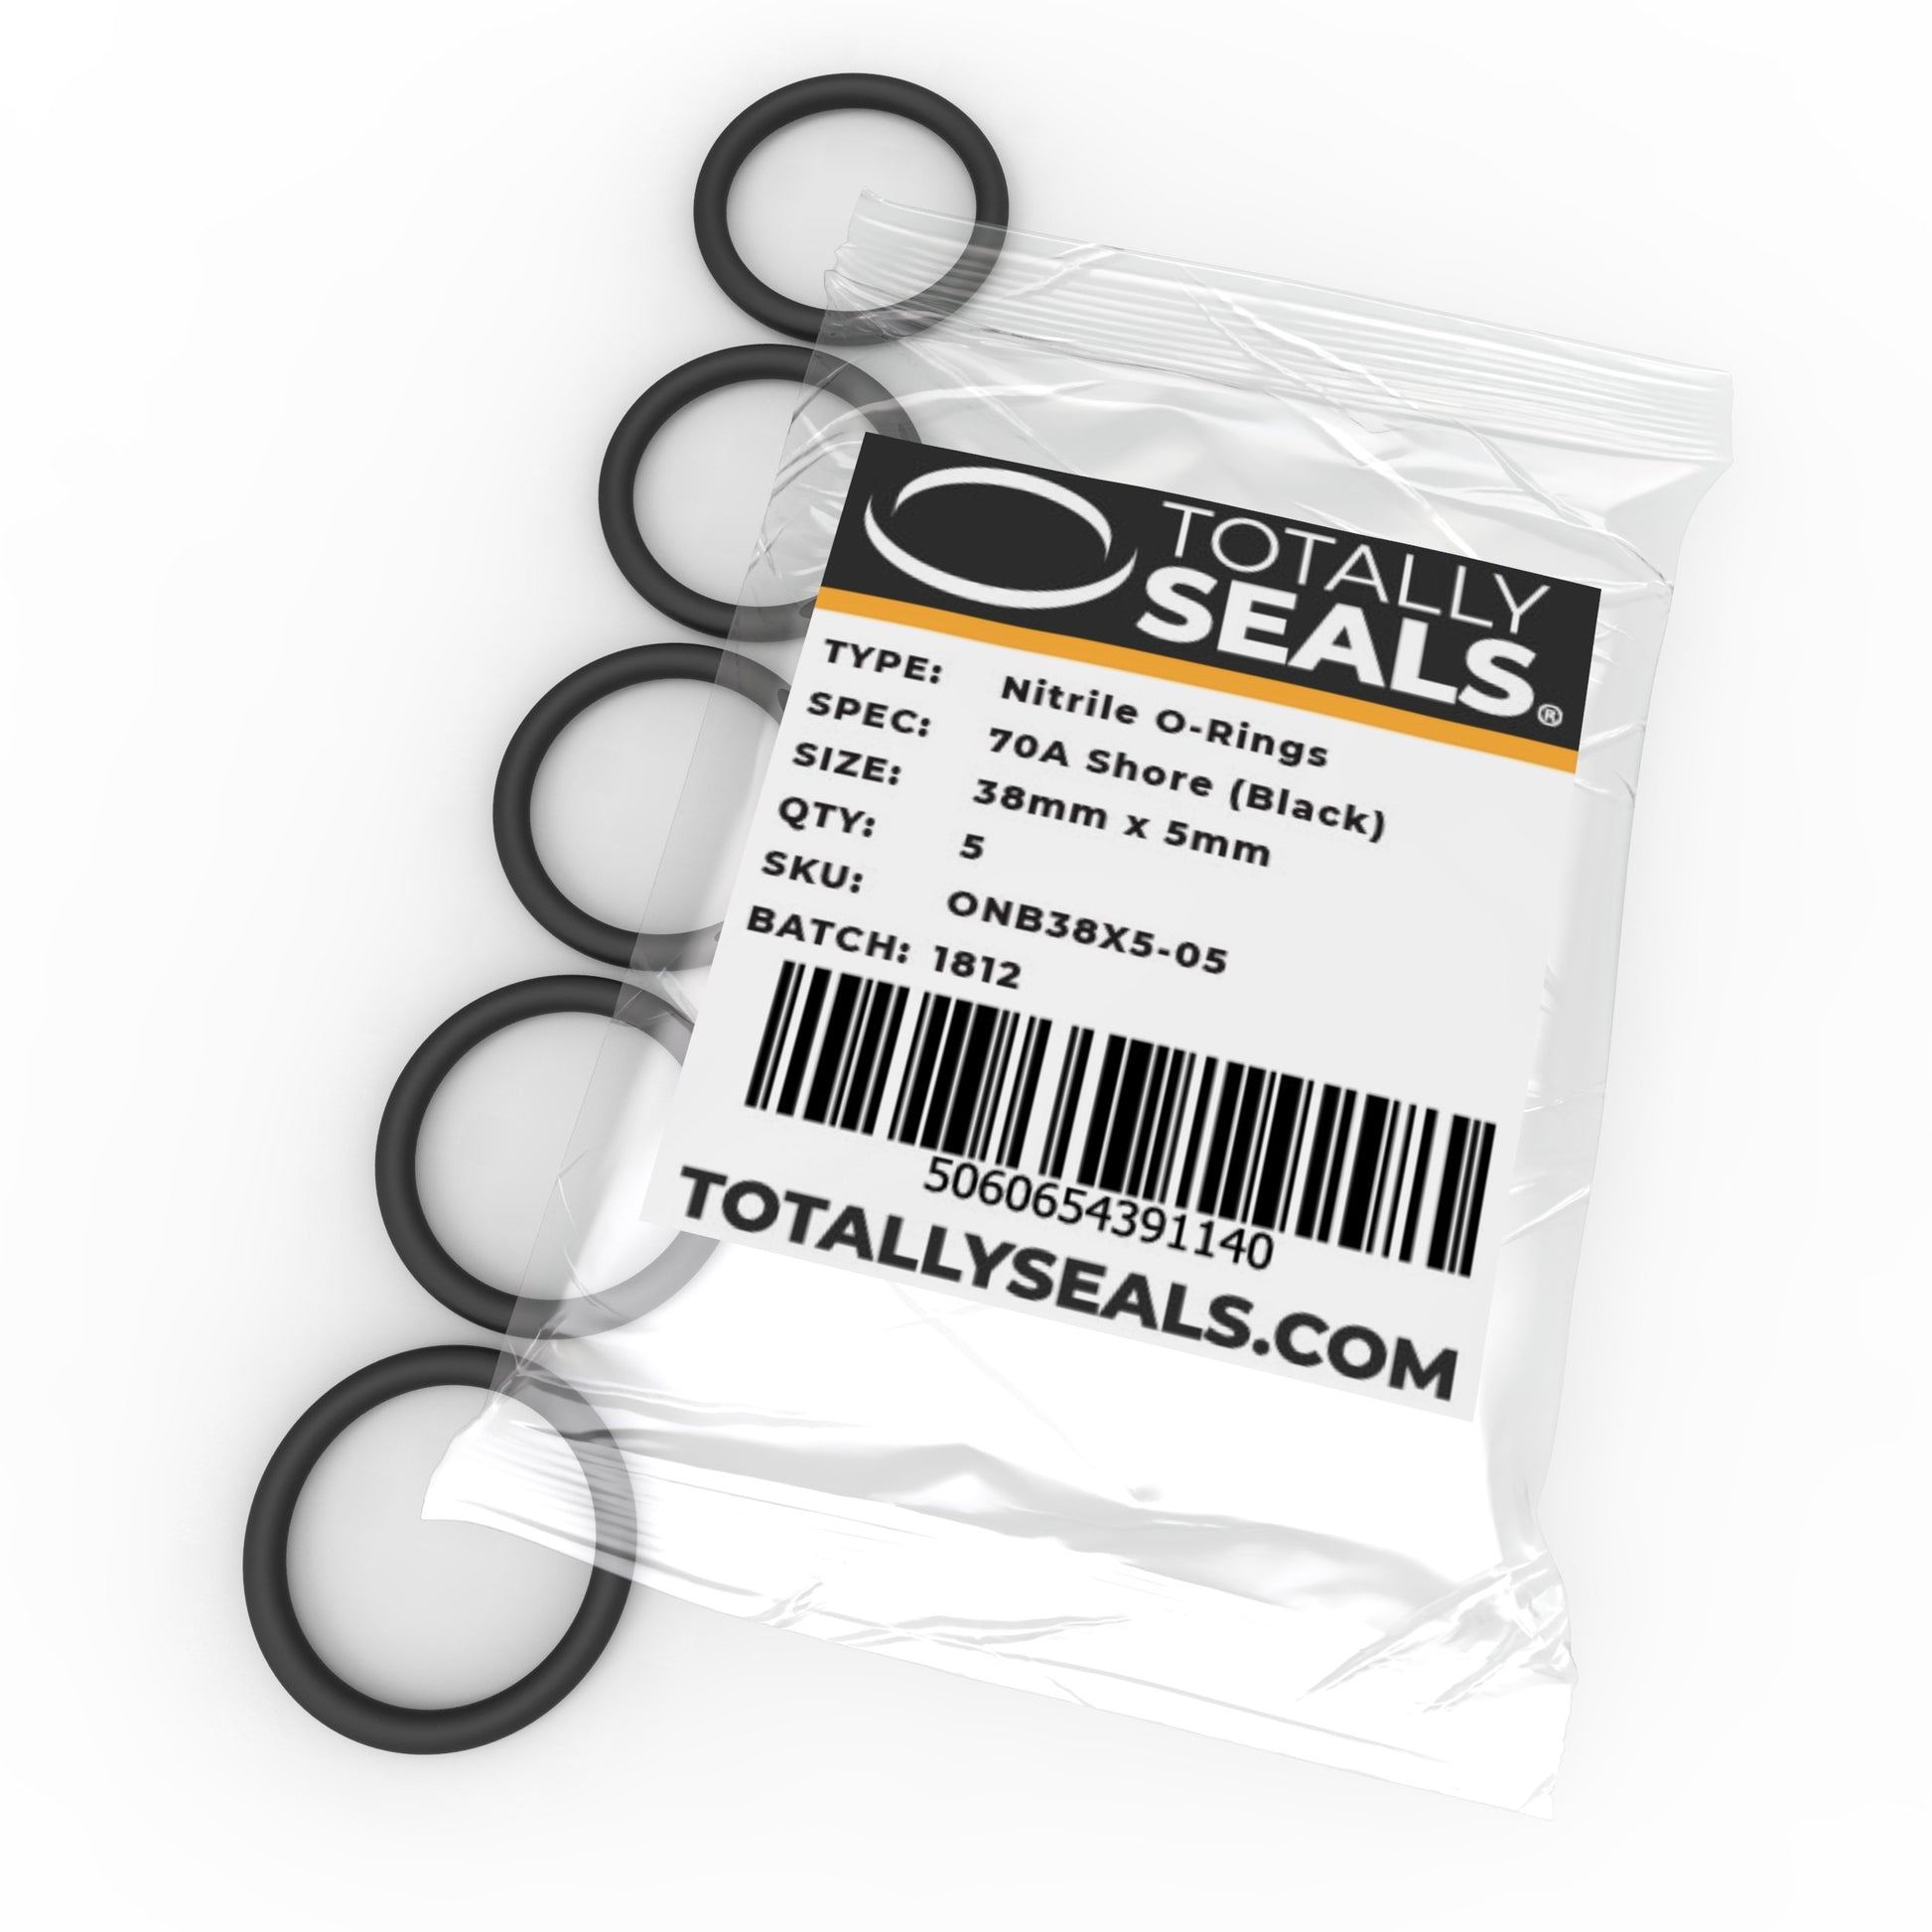 38mm x 5mm (48mm OD) Nitrile O-Rings - Totally Seals®